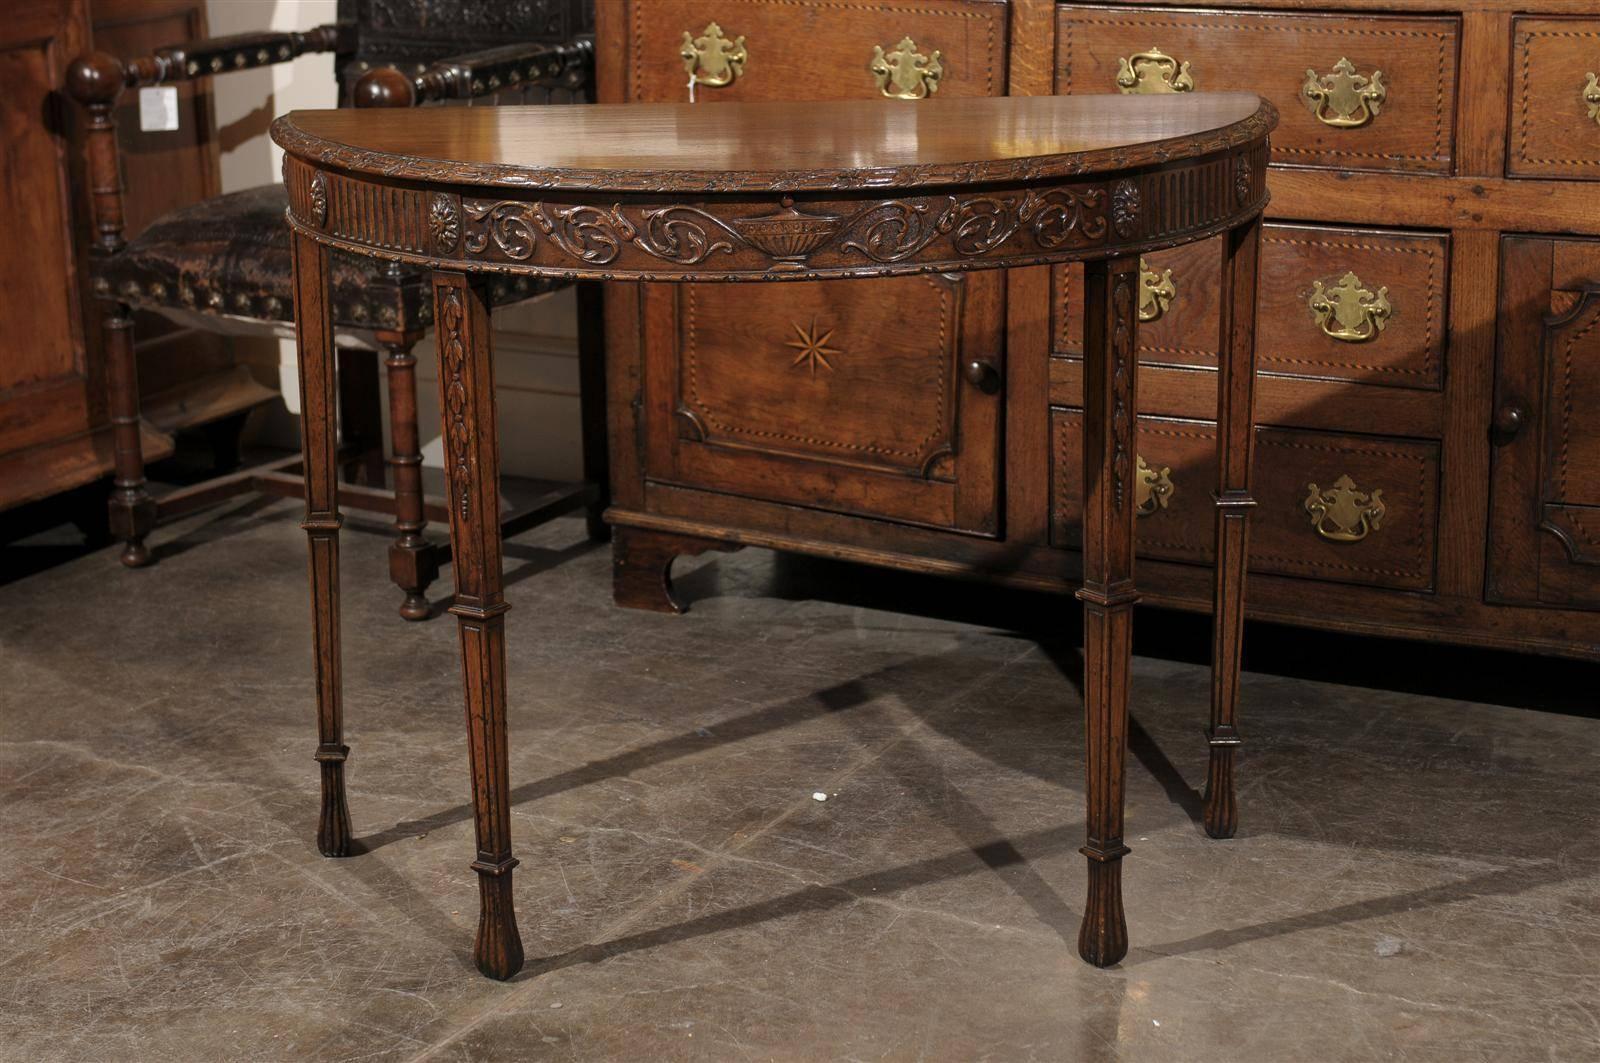 This English wooden demi-lune table from the turn of the century (19th to 20th) features a half-moon shaped top with a carved and beveled edge. The skirt is delicately carved with a cassolette in the center, flanked with rinceaux friezes on each